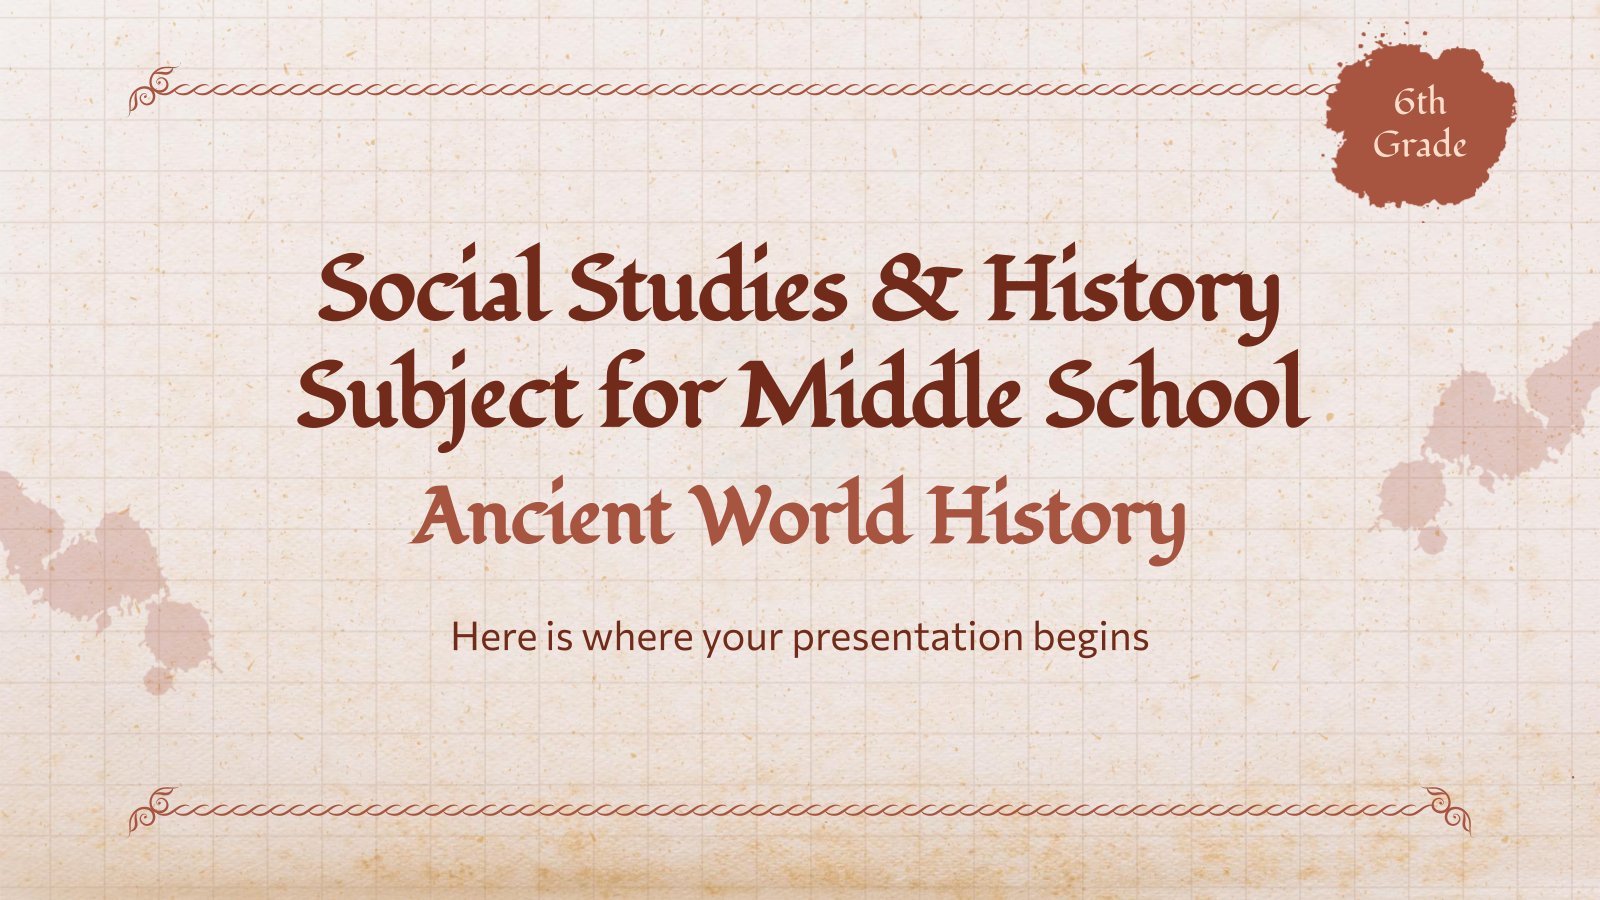 Social Studies & History Subject for Middle School - 6th Grade: Ancient World History presentation template 